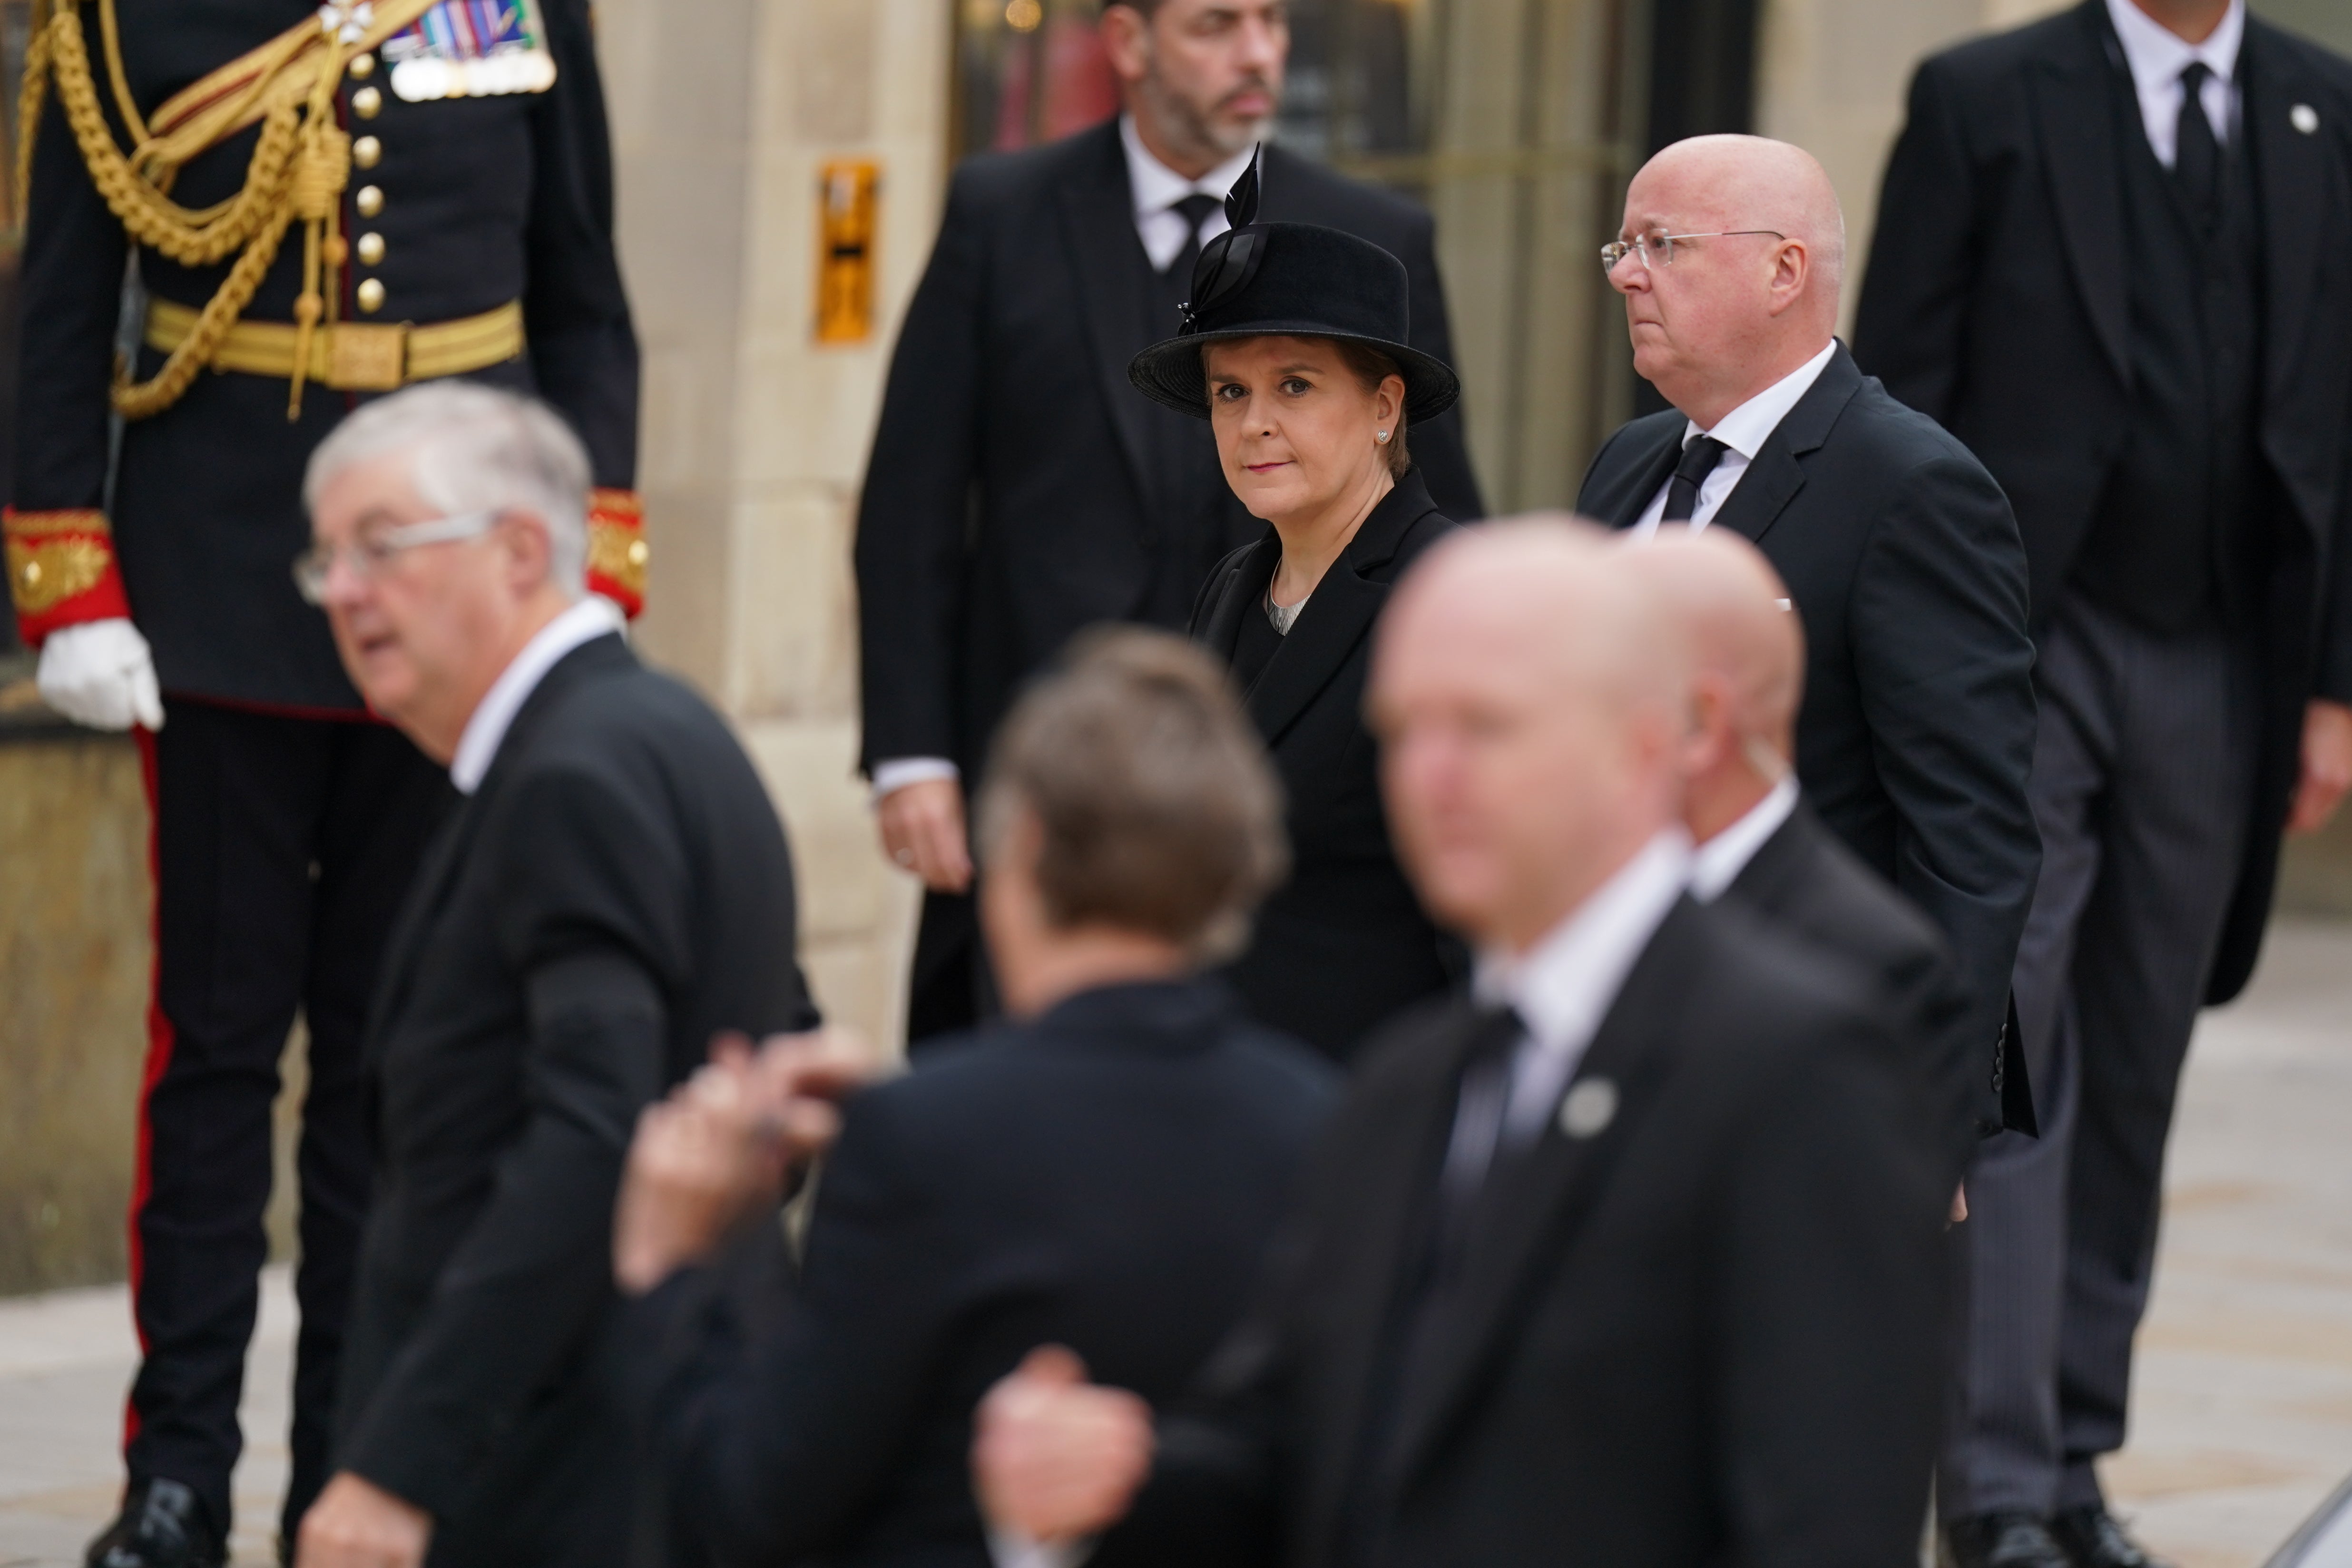 Nicola Sturgeon described the state funeral for the Queen as being ‘one of the most momentous occasions in recent history’ (Andrew Milligan/PA)